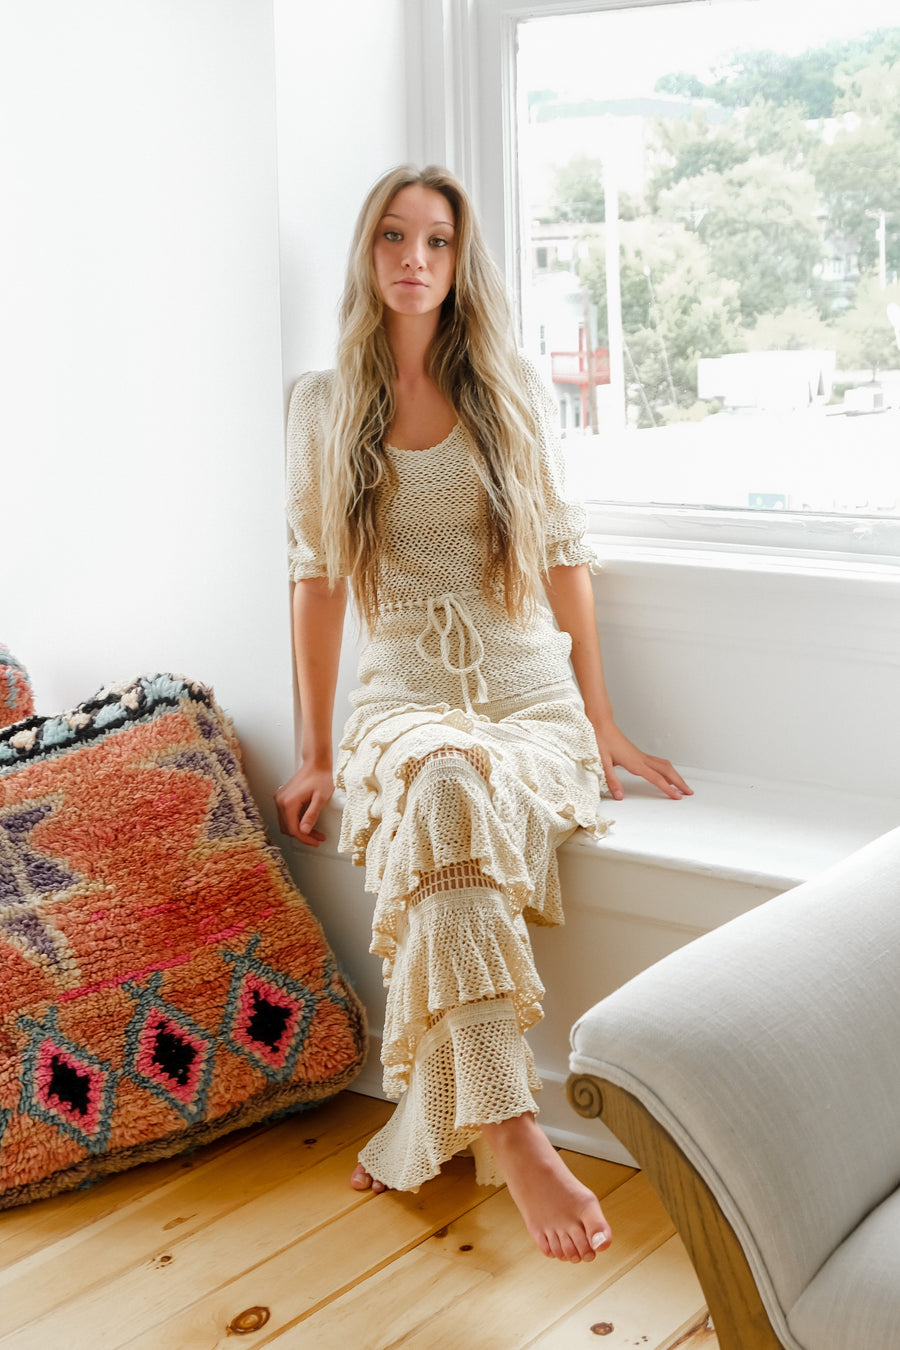 The Maxi Skirt in Beige